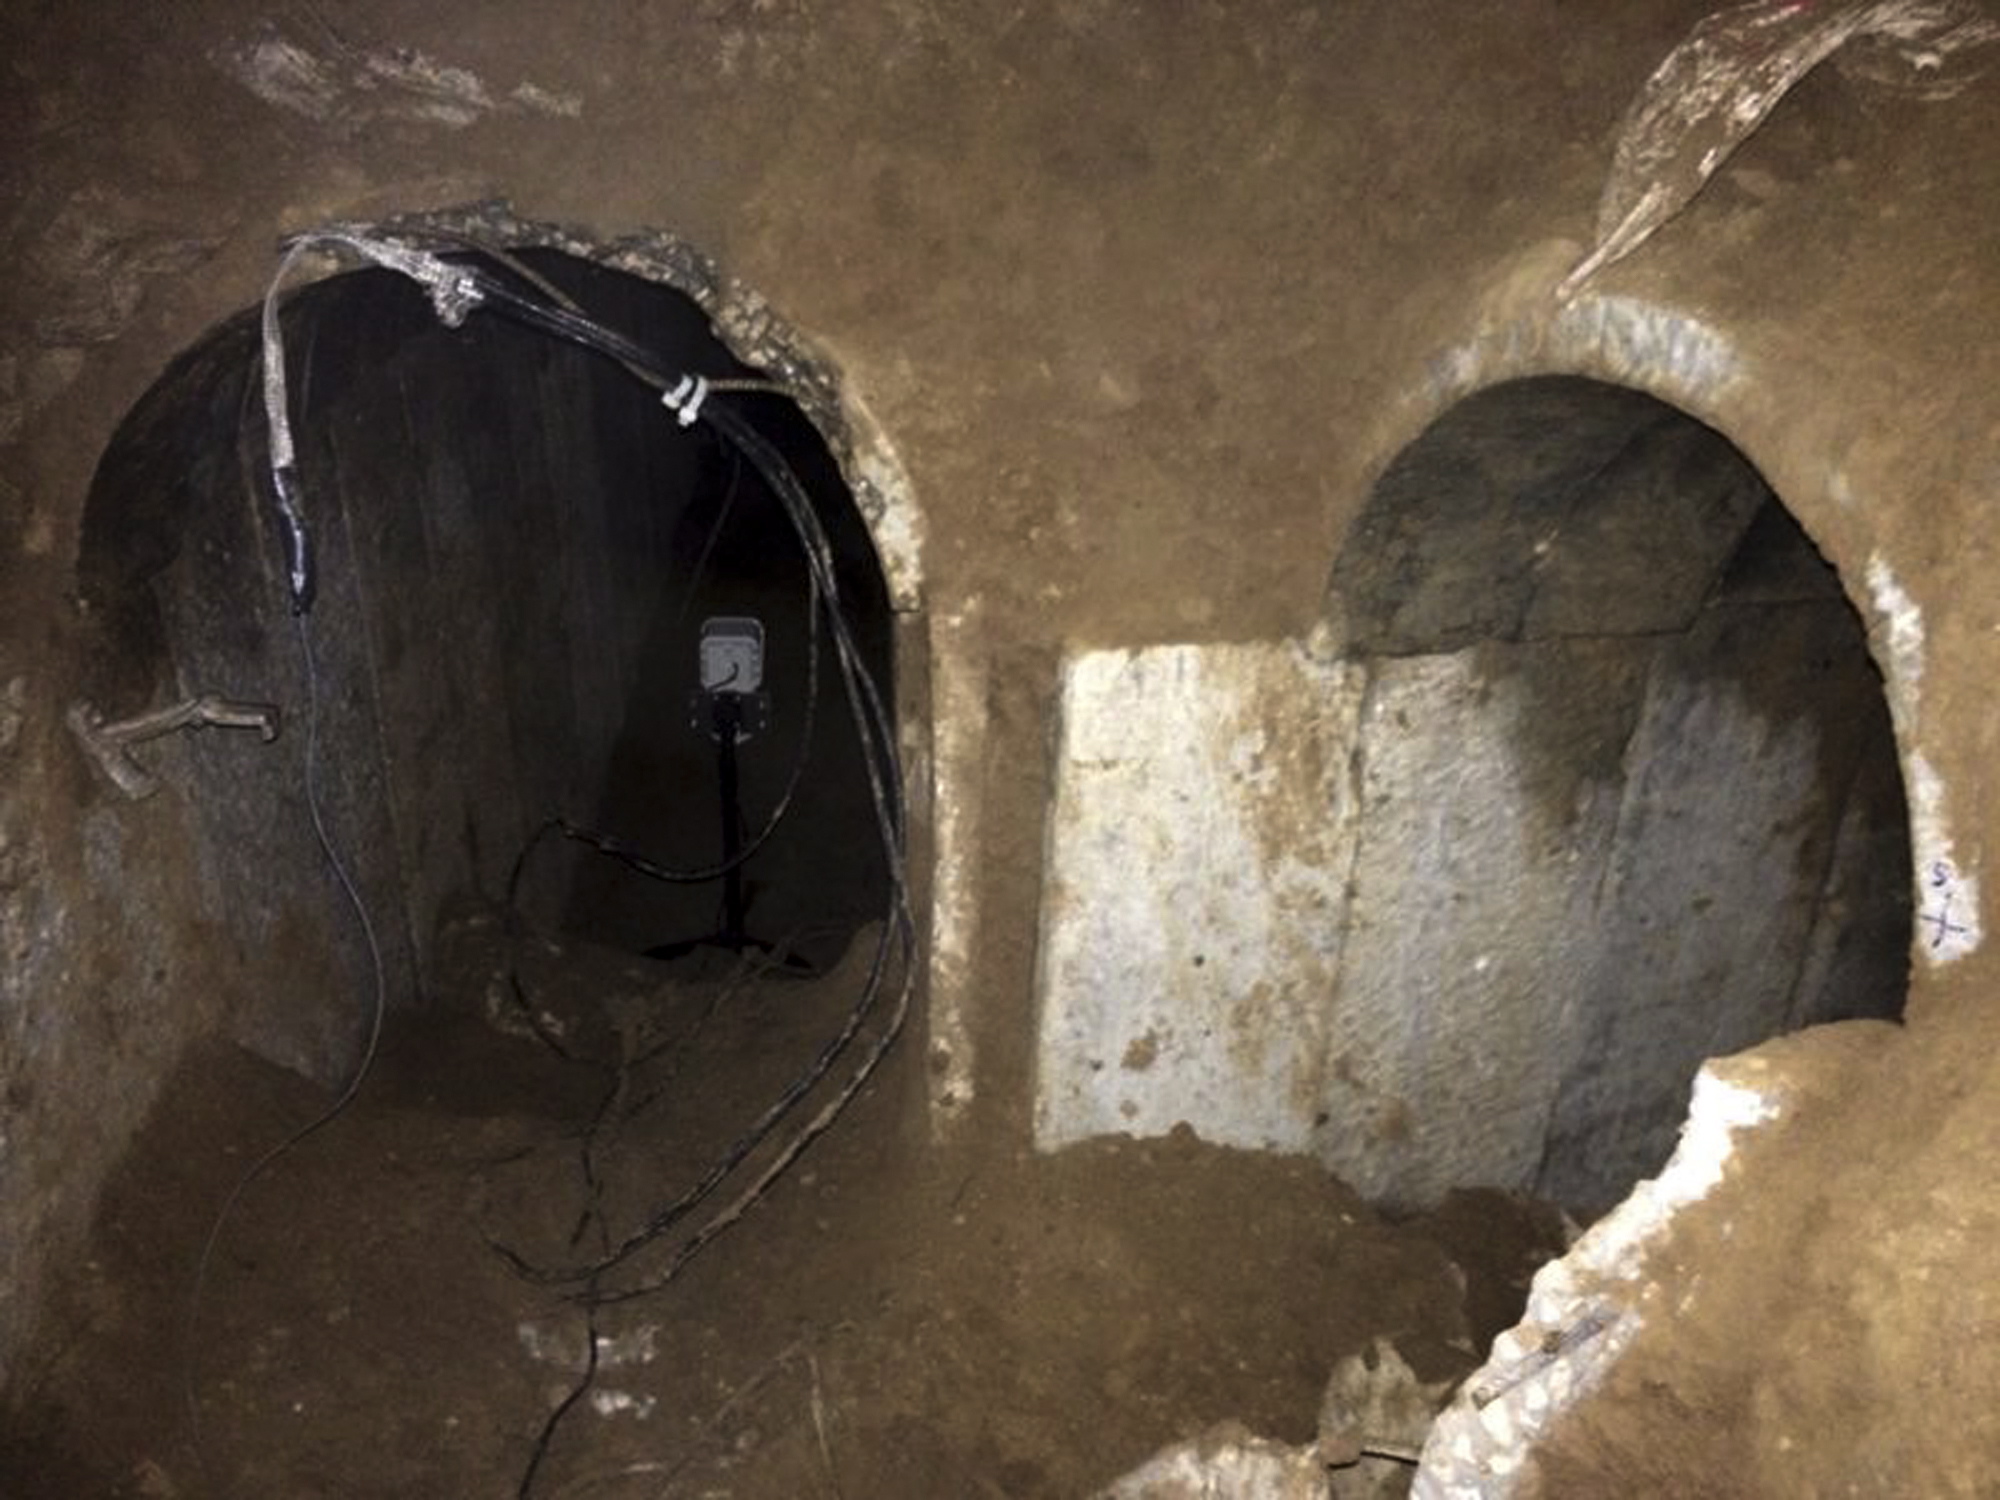 Israeli Defense Forces
The Israel Defense Forces announced Friday the discovery of a tunnel, dug from the Gaza Strip, that stretches hundreds of yards into Israel.